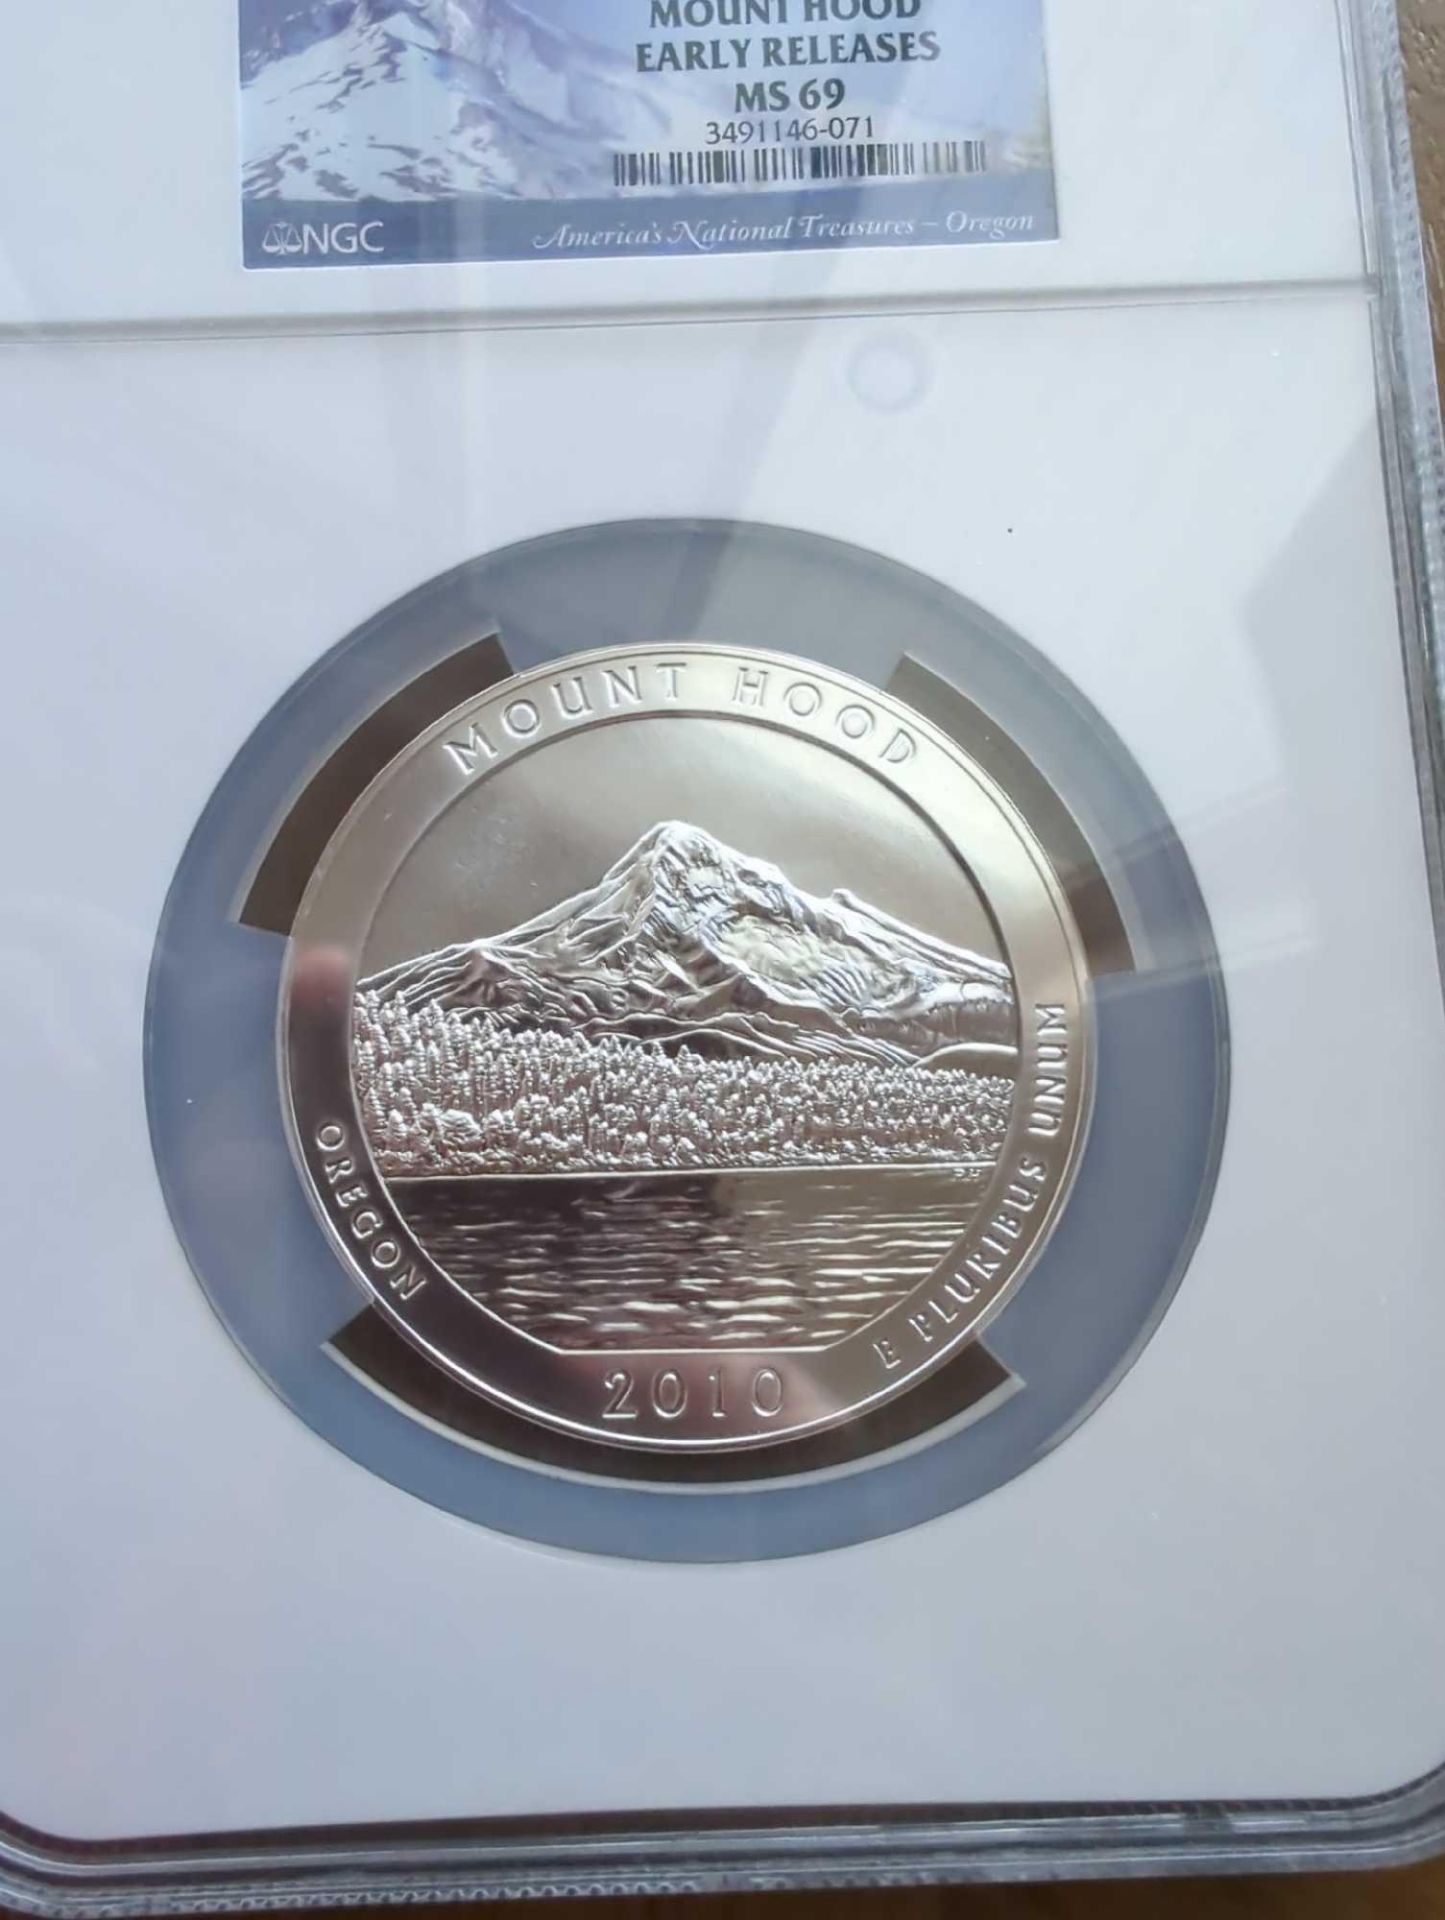 2010 5oz Silver 25c Mount Hood Early Releases MS 69 - Image 2 of 5